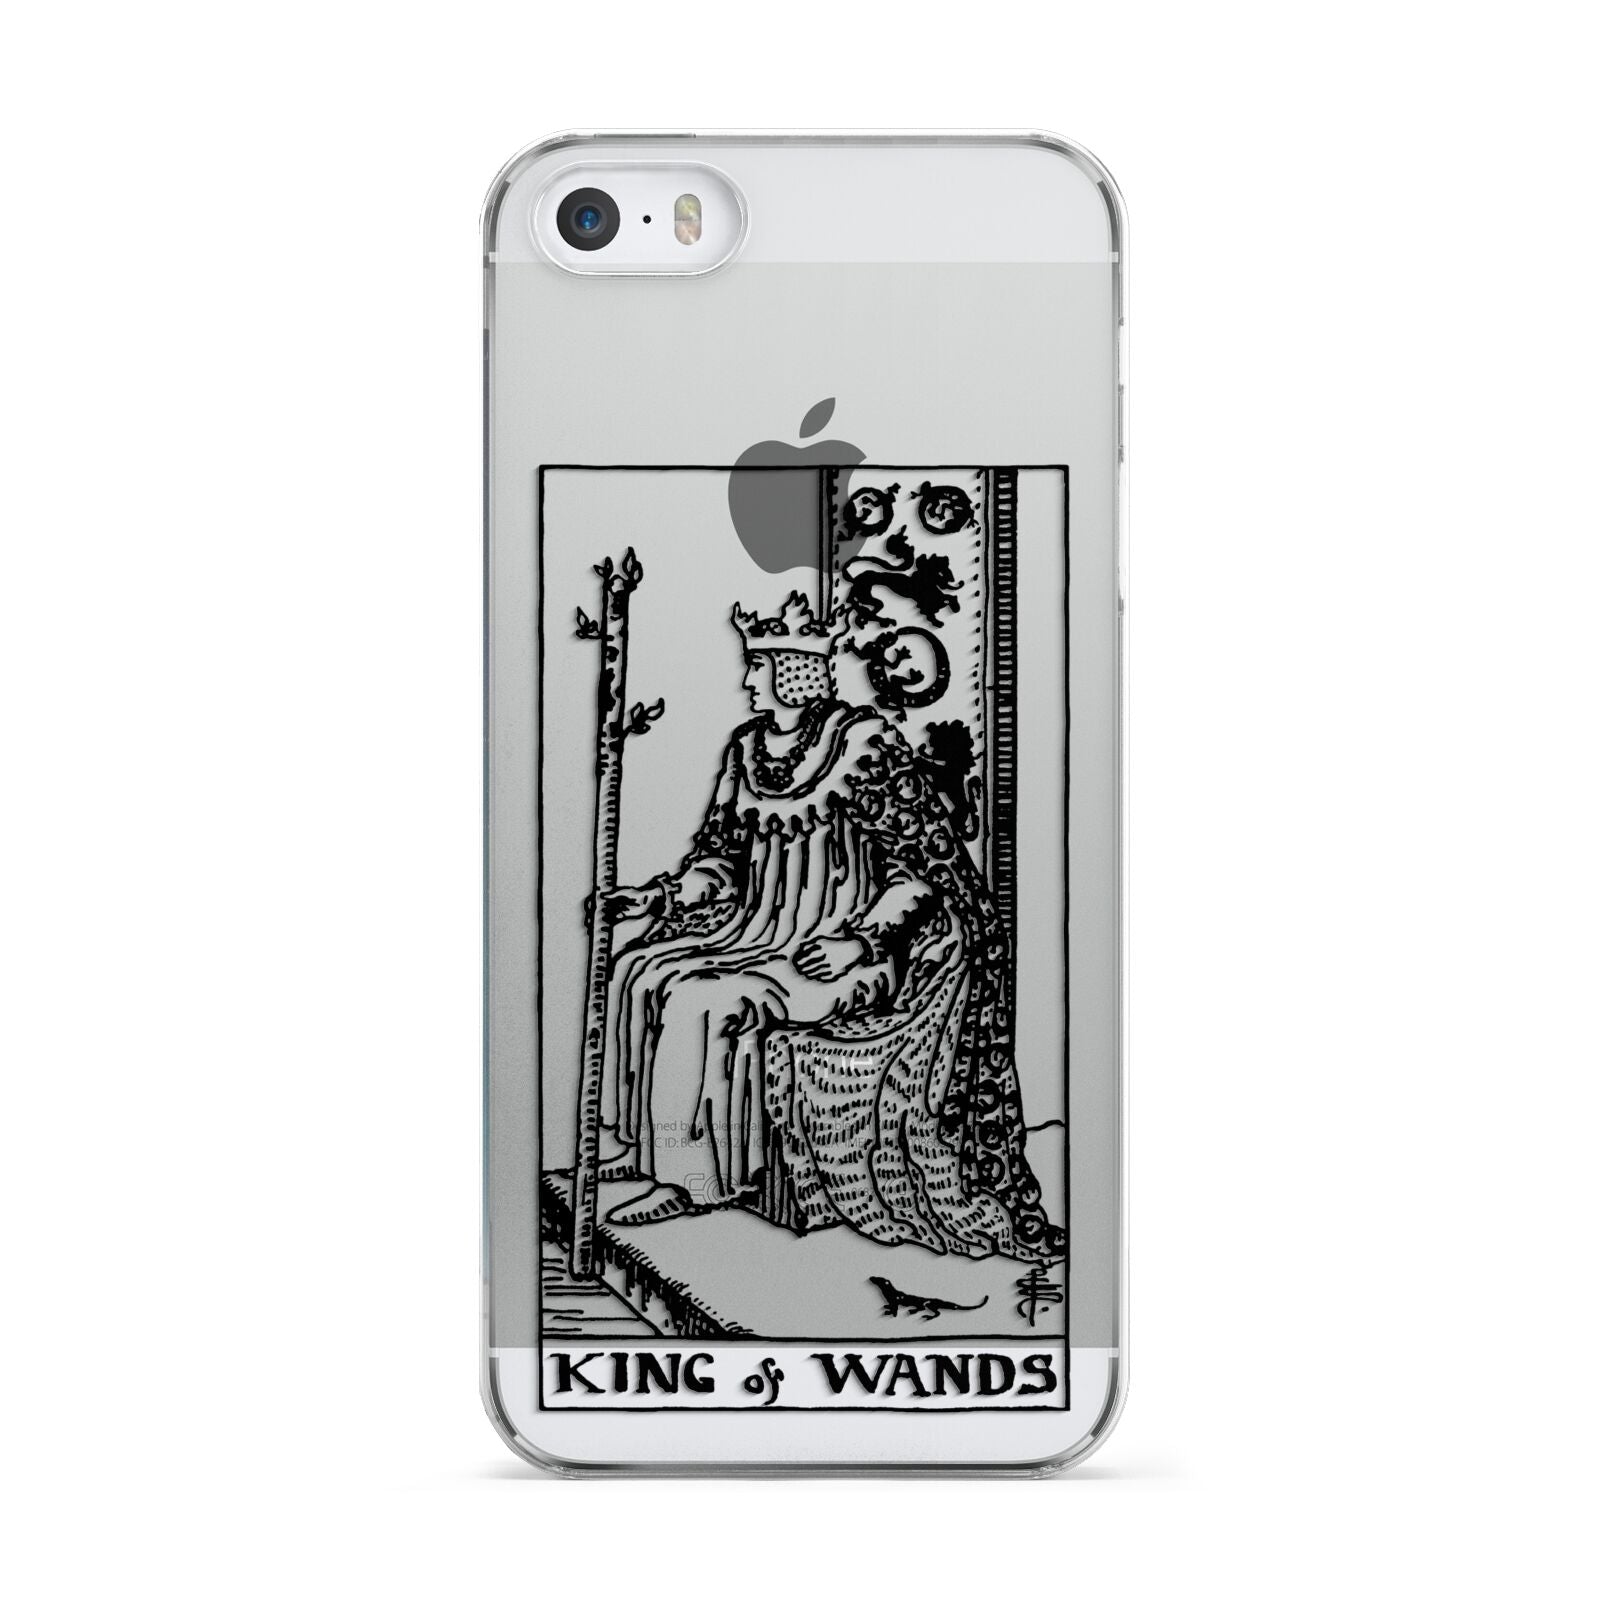 King of Wands Monochrome Apple iPhone 5 Case